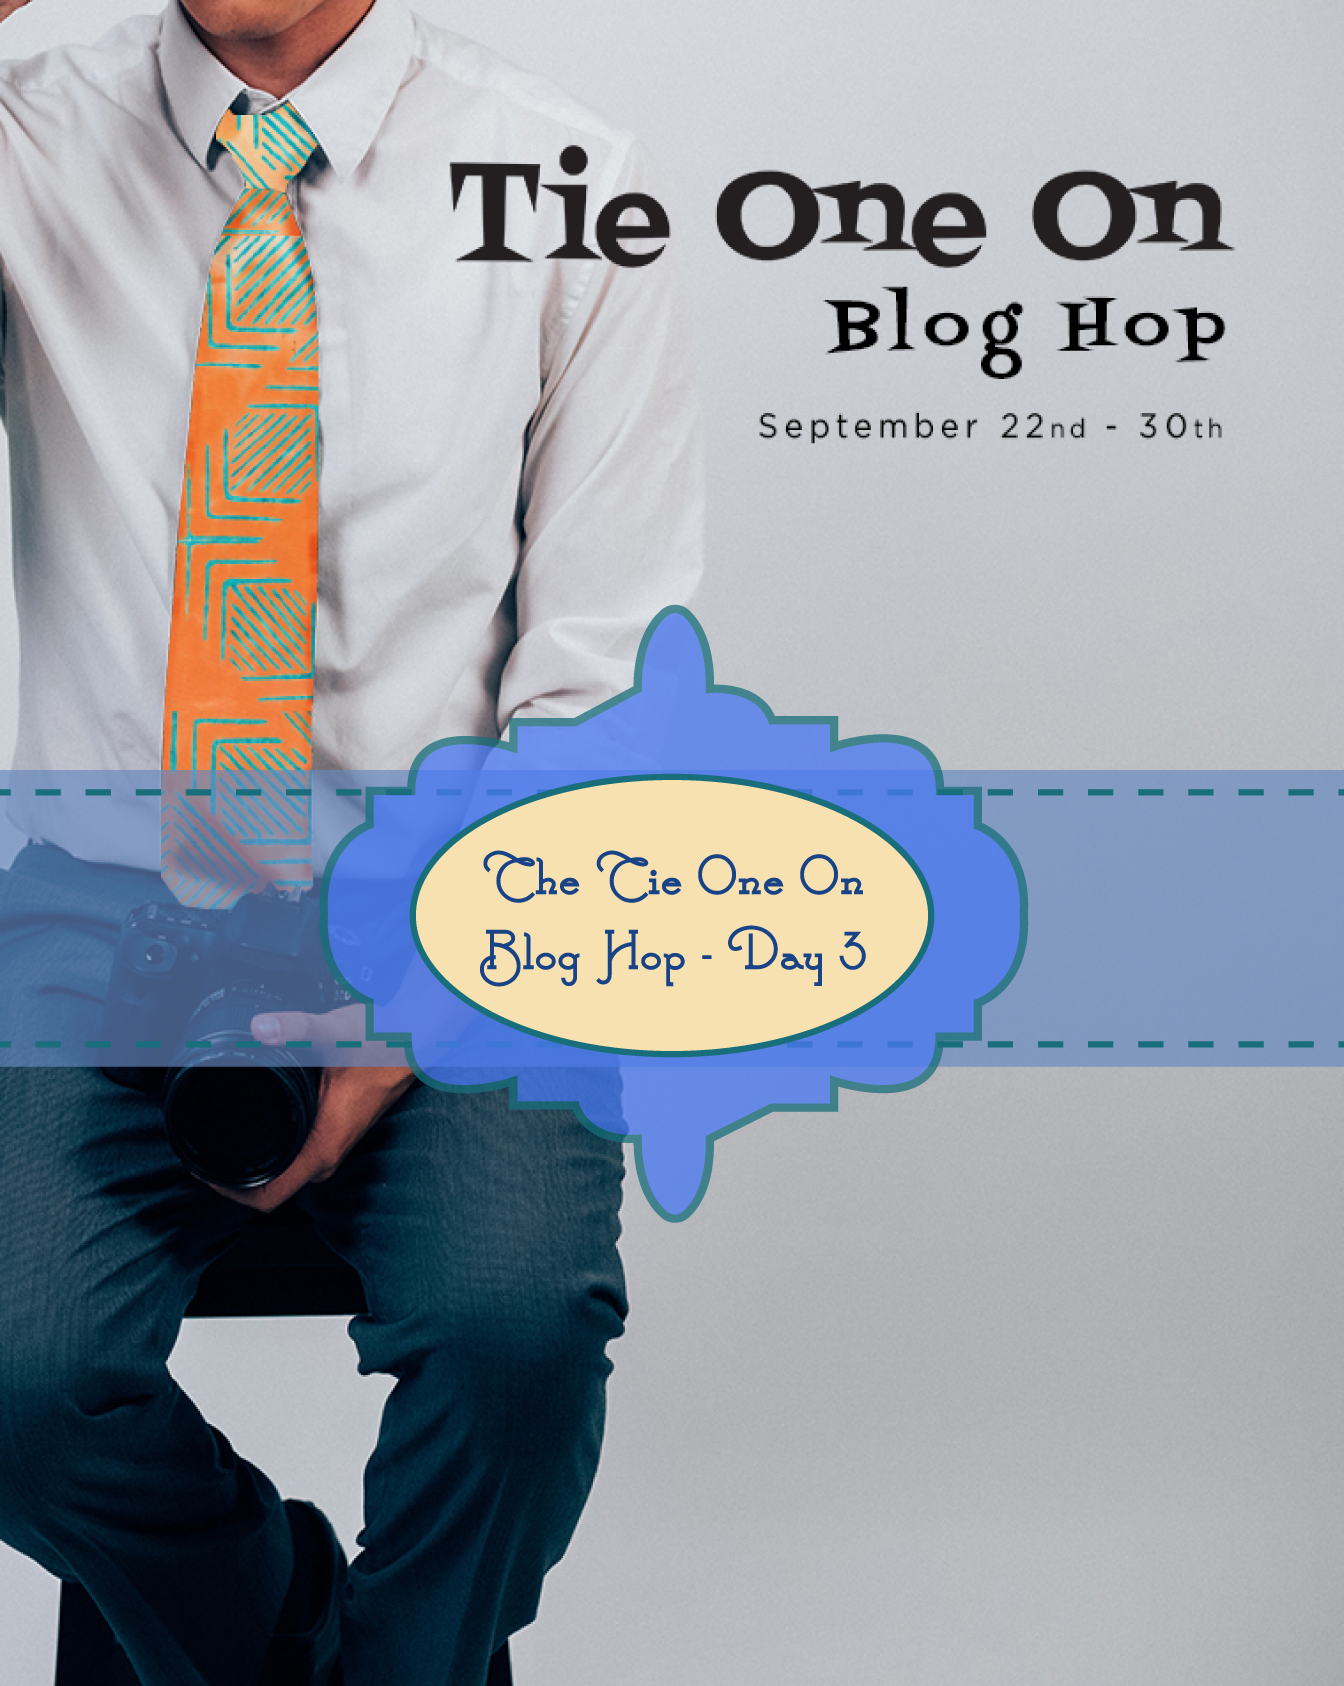 Tie One On Blog Hop Day 3